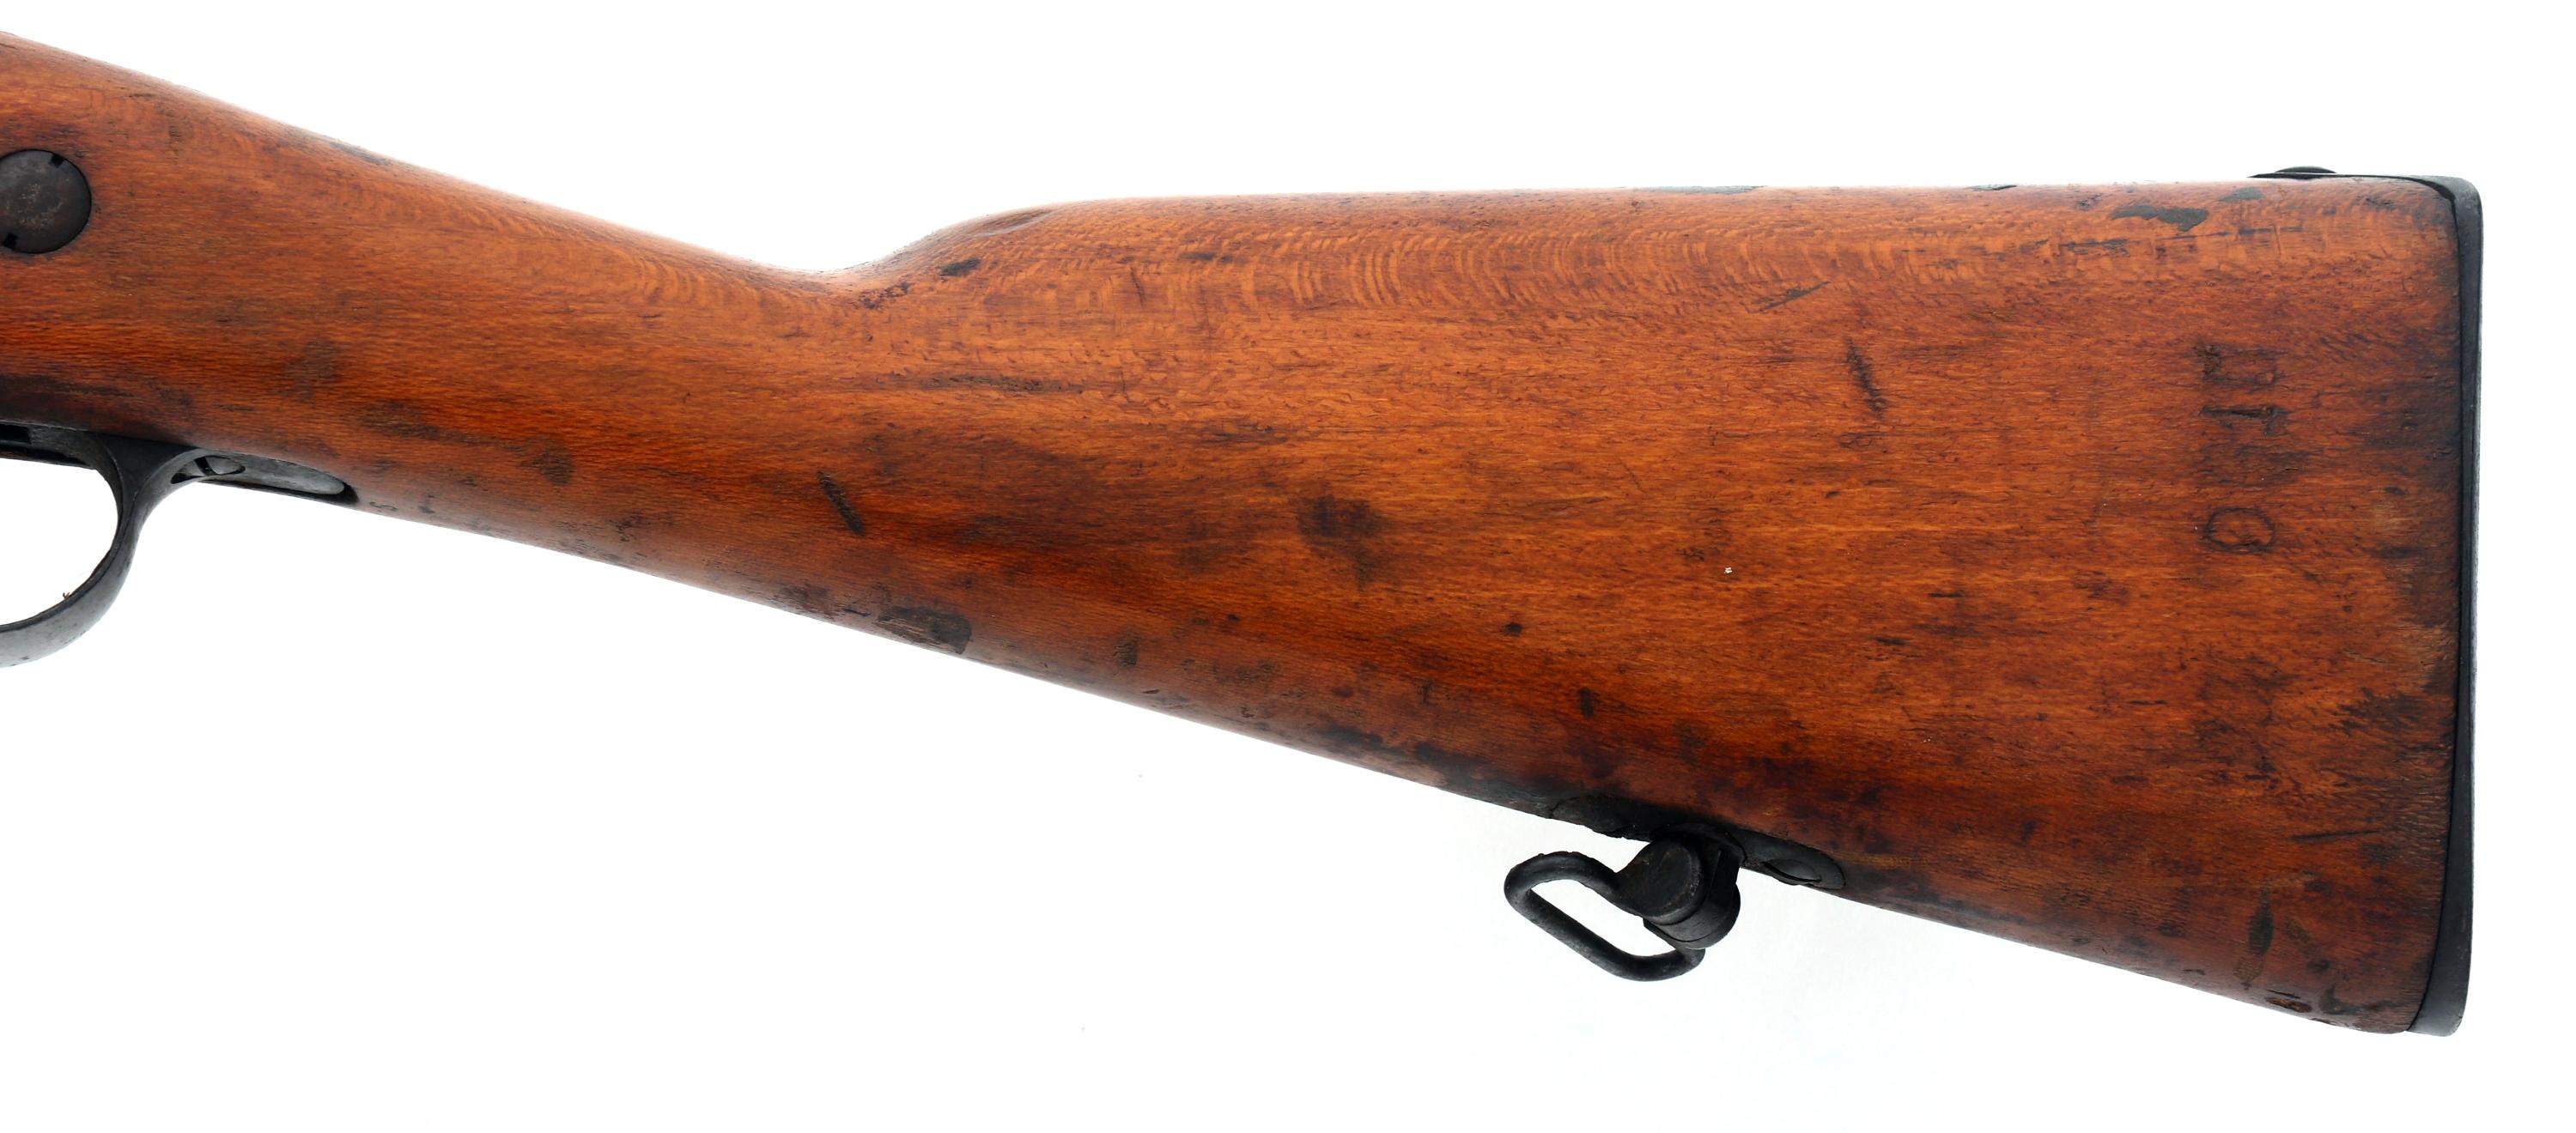 FRENCH ST ETIENNE MODEL M16 7.5x54mm CAL RIFLE